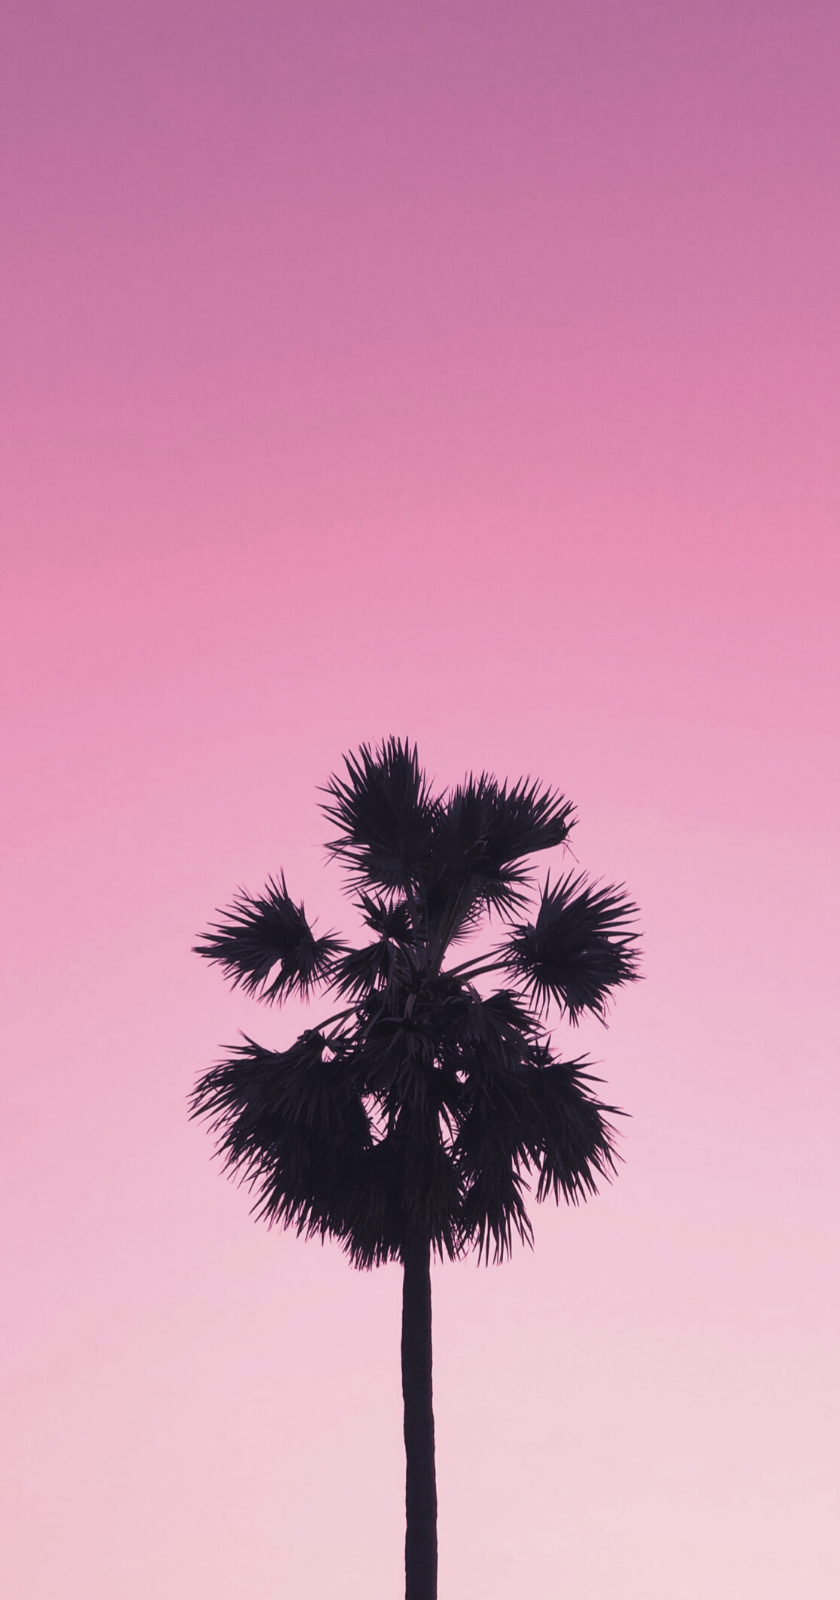 pin on iphone wallpaper on pink vibes wallpapers